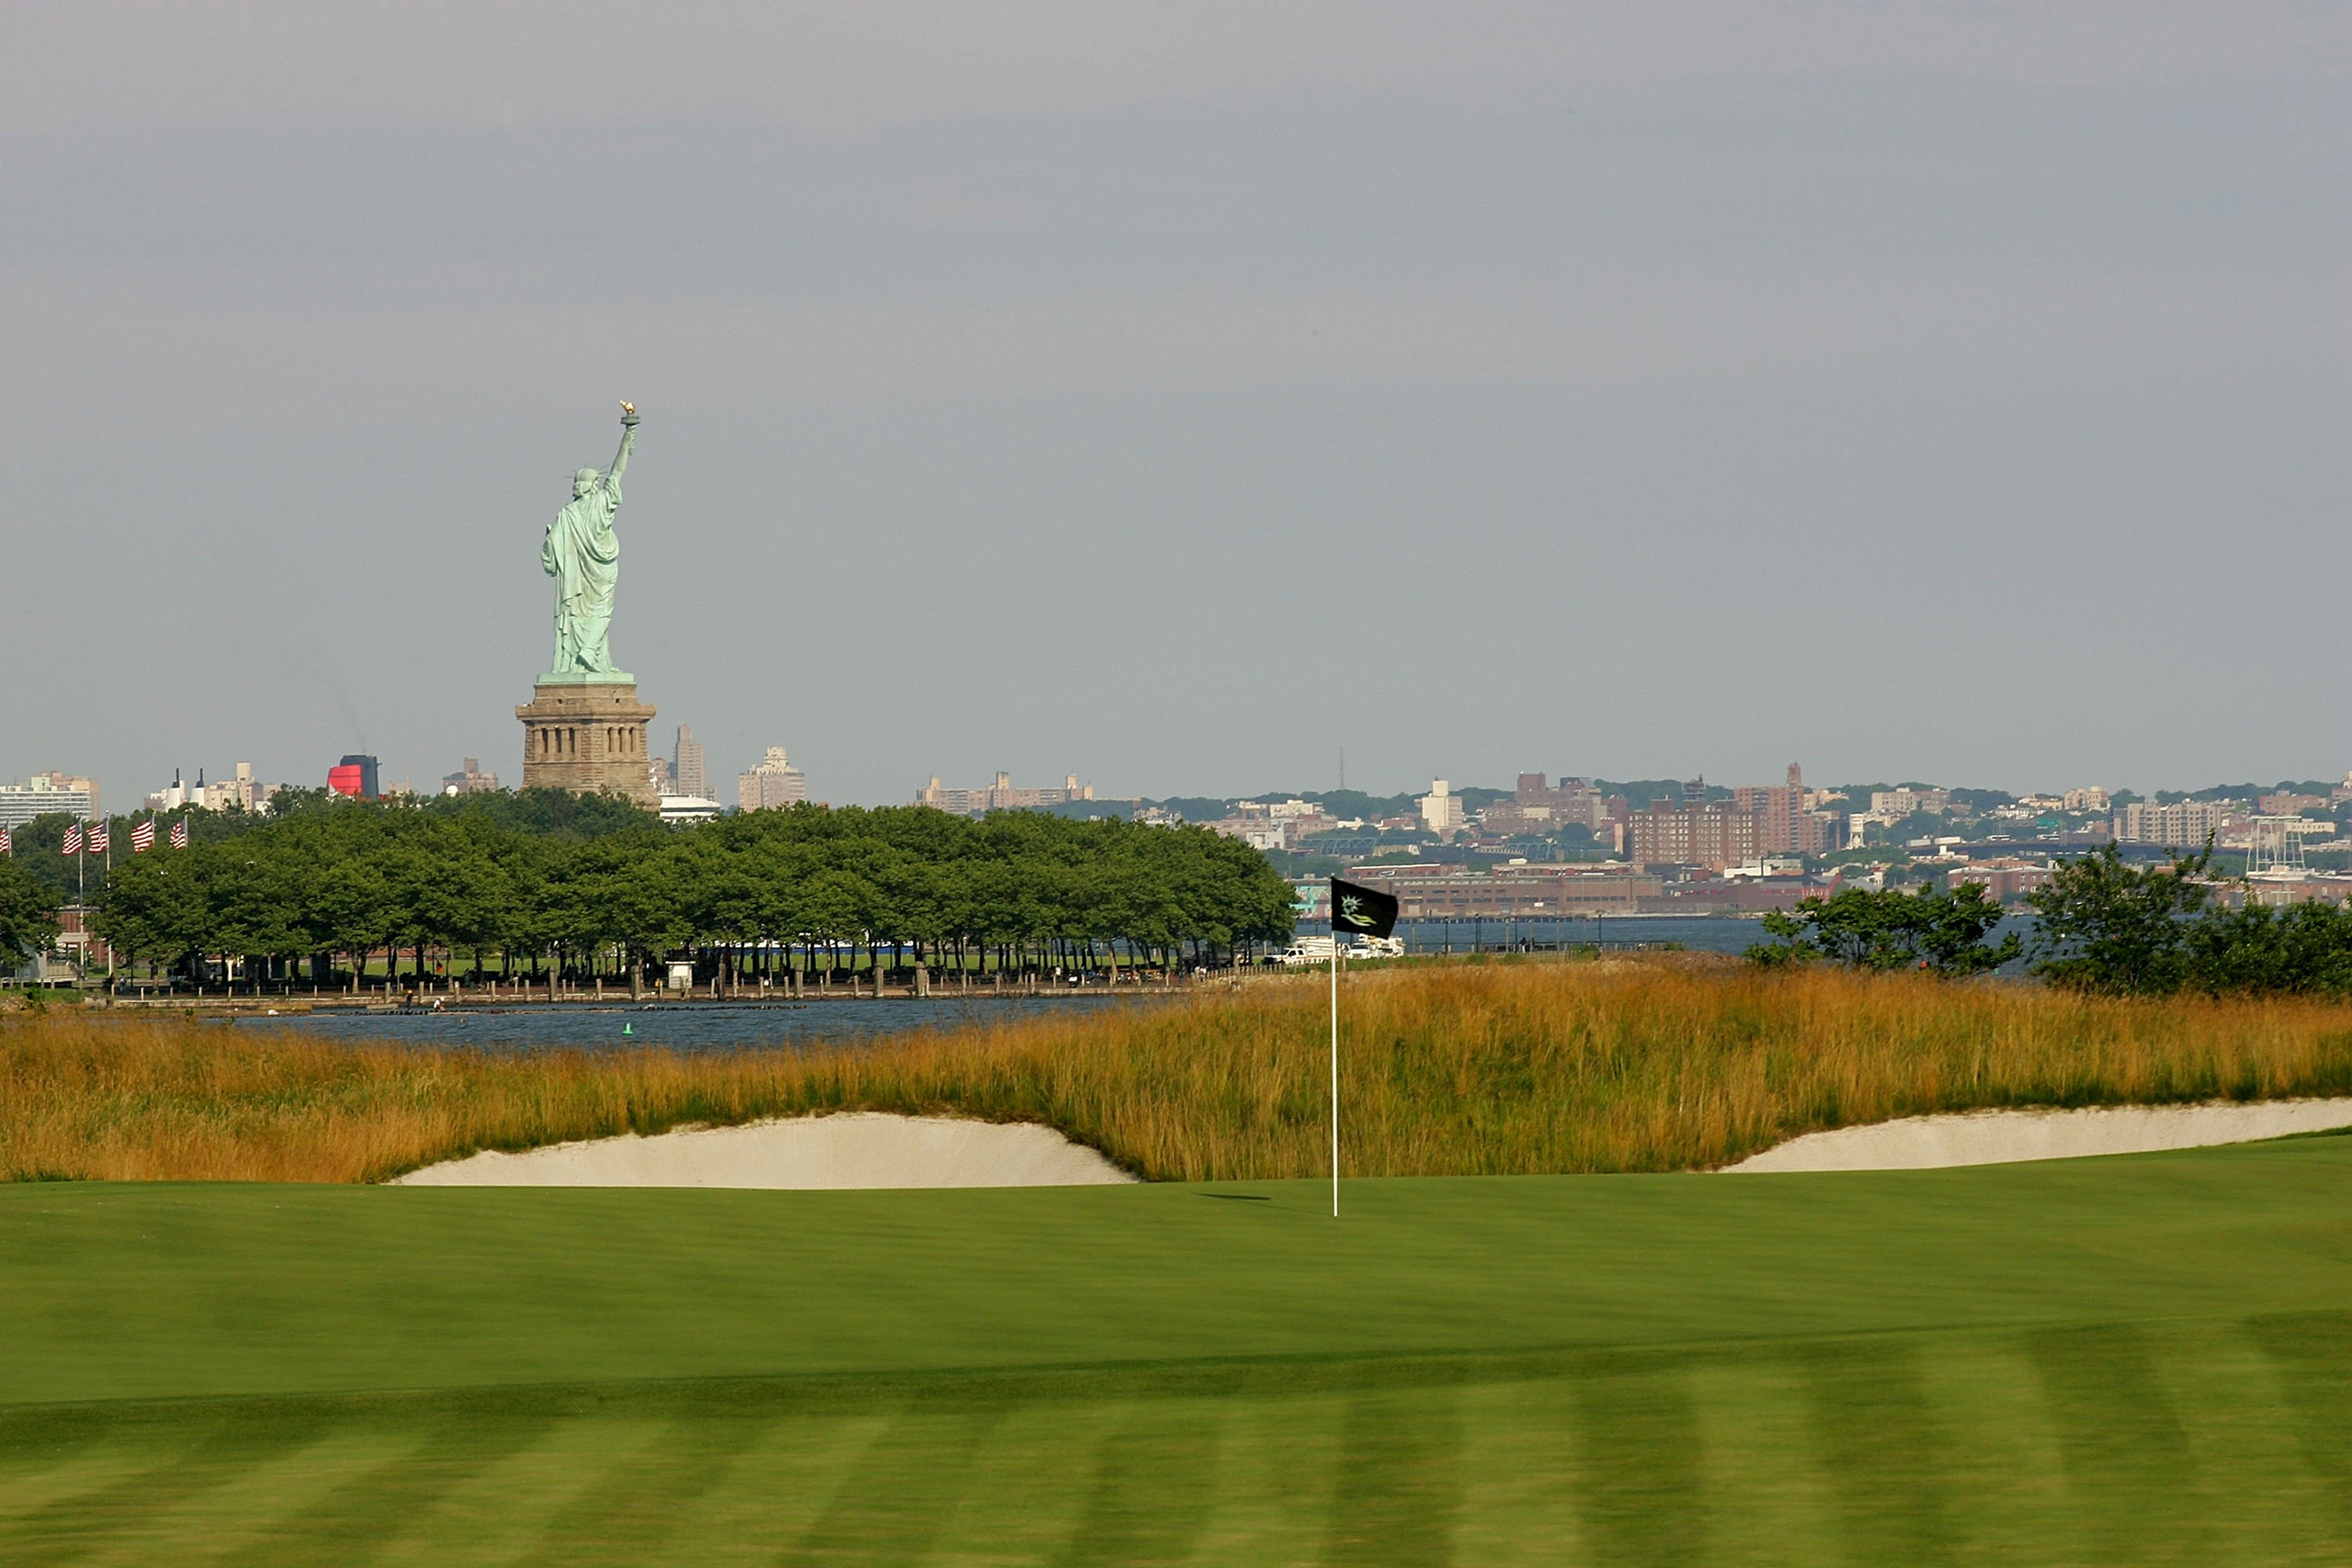 A view of the Statue of Liberty from the Liberty National Golf Club